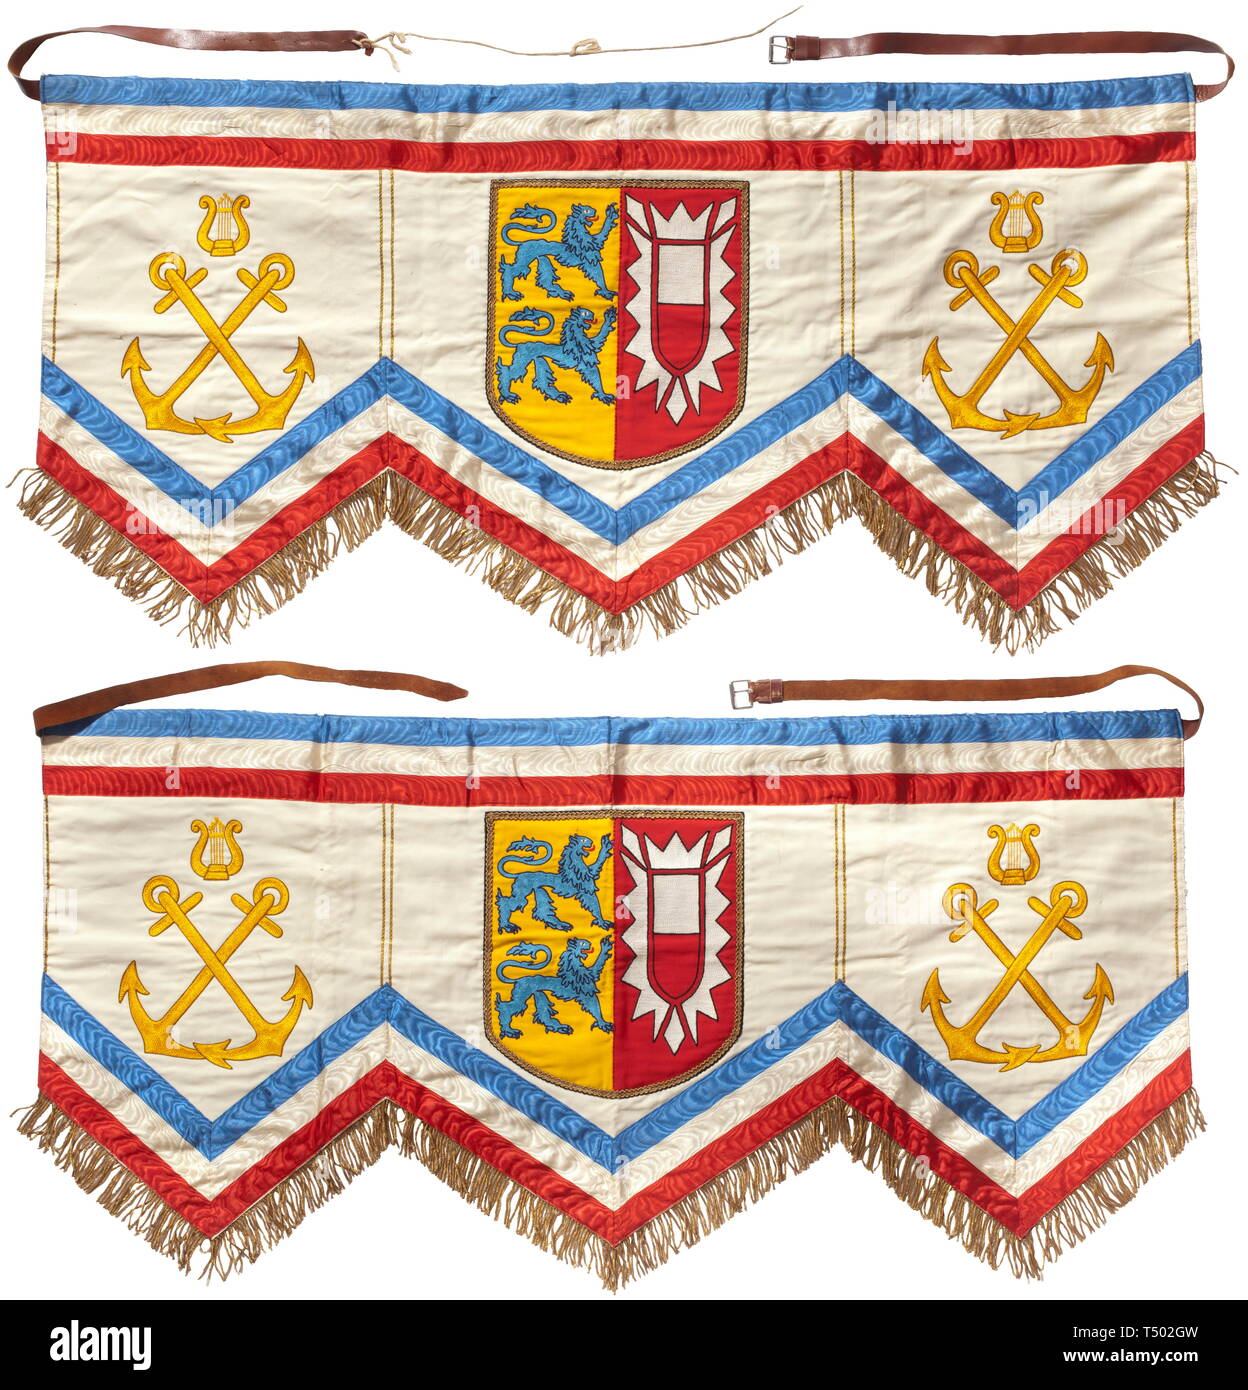 Two kettledrum hangings - line battleship Schleswig-Holstein. Fine cotton cloth rendered in multiple colours with trim in the state colours of Schleswig-Holstein and gold fringe, the fields with crossed anchors with lyres and the coat of arms of the state that gave its name to the ship, leather strapping. The reverse of each labelled with the flag factory tag of 'M. Fleck, Hamburg'. Cloth dimensions ca. 110 x 55 cm. Extremely rare kettledrum hangings. On 1 September 1939 the ship participated in the attack against the fortified Westerplatte position near Danzig. According t, Editorial-Use-Only Stock Photo